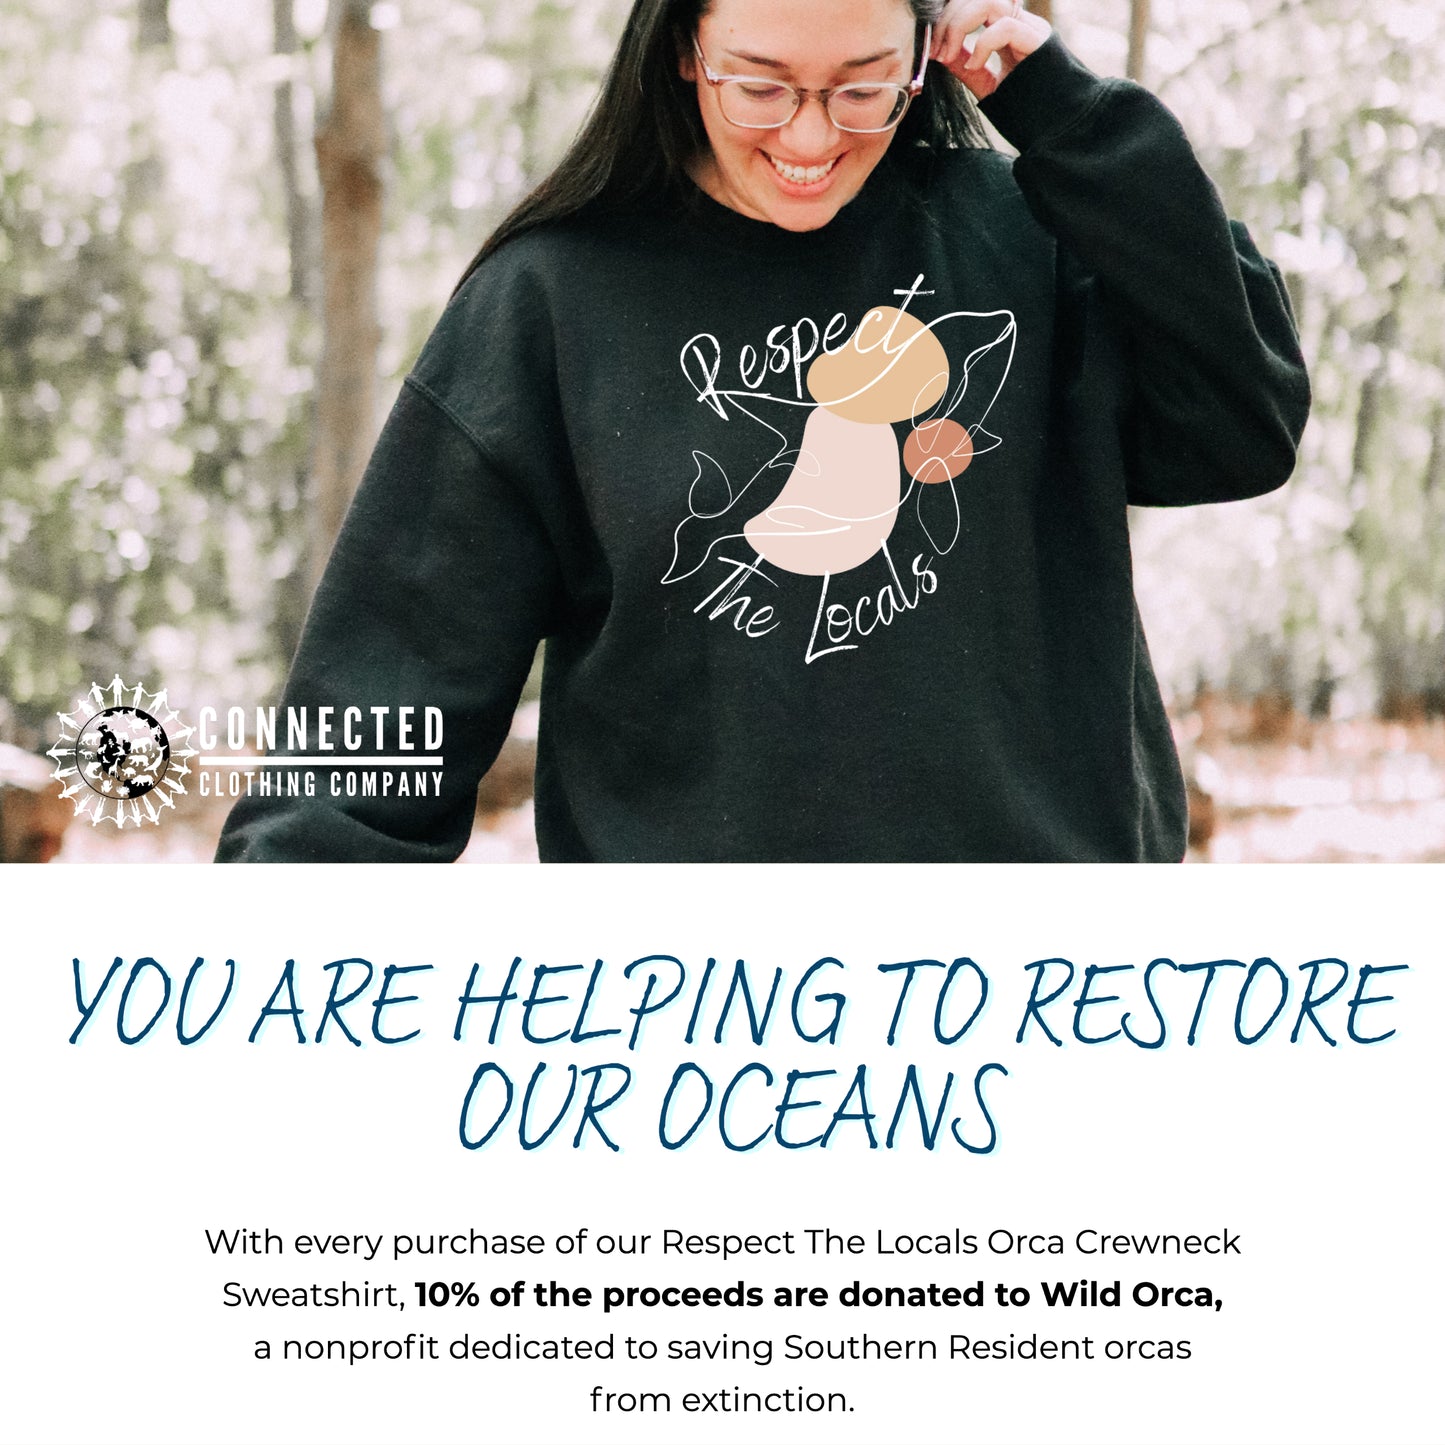 You are helping to restore our oceans. With every purchase of our Respect The Locals Orca Crewneck Sweatshirt, 10% of the proceeds are donated to Wild Orca, a nonprofit dedicated to saving Southern Resident orcas from extinction.